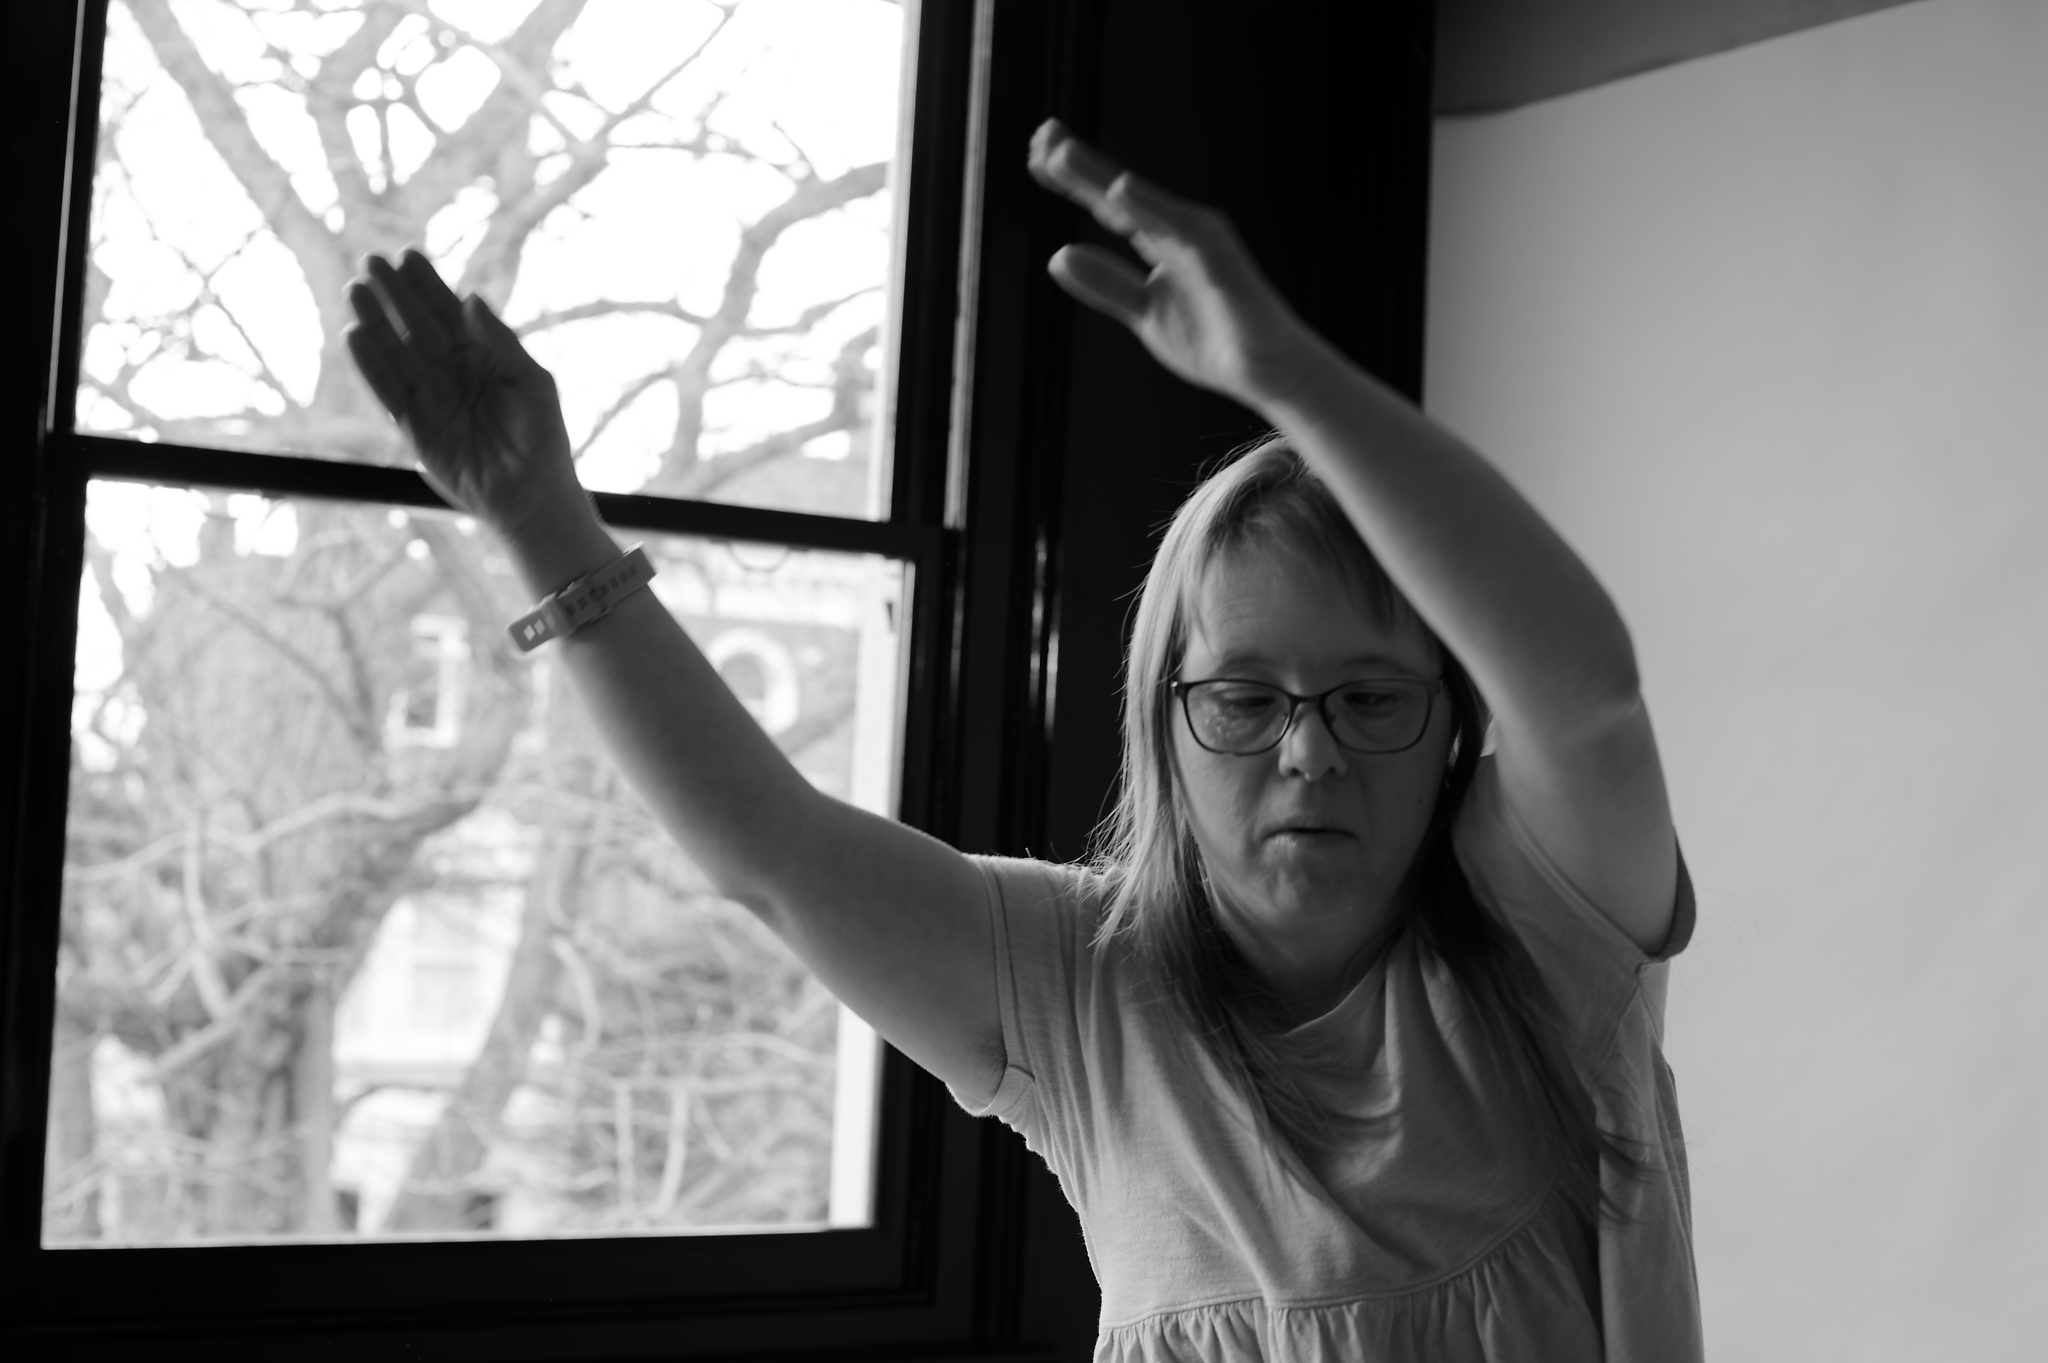 Black and white photo of a woman dancing with her arms raised